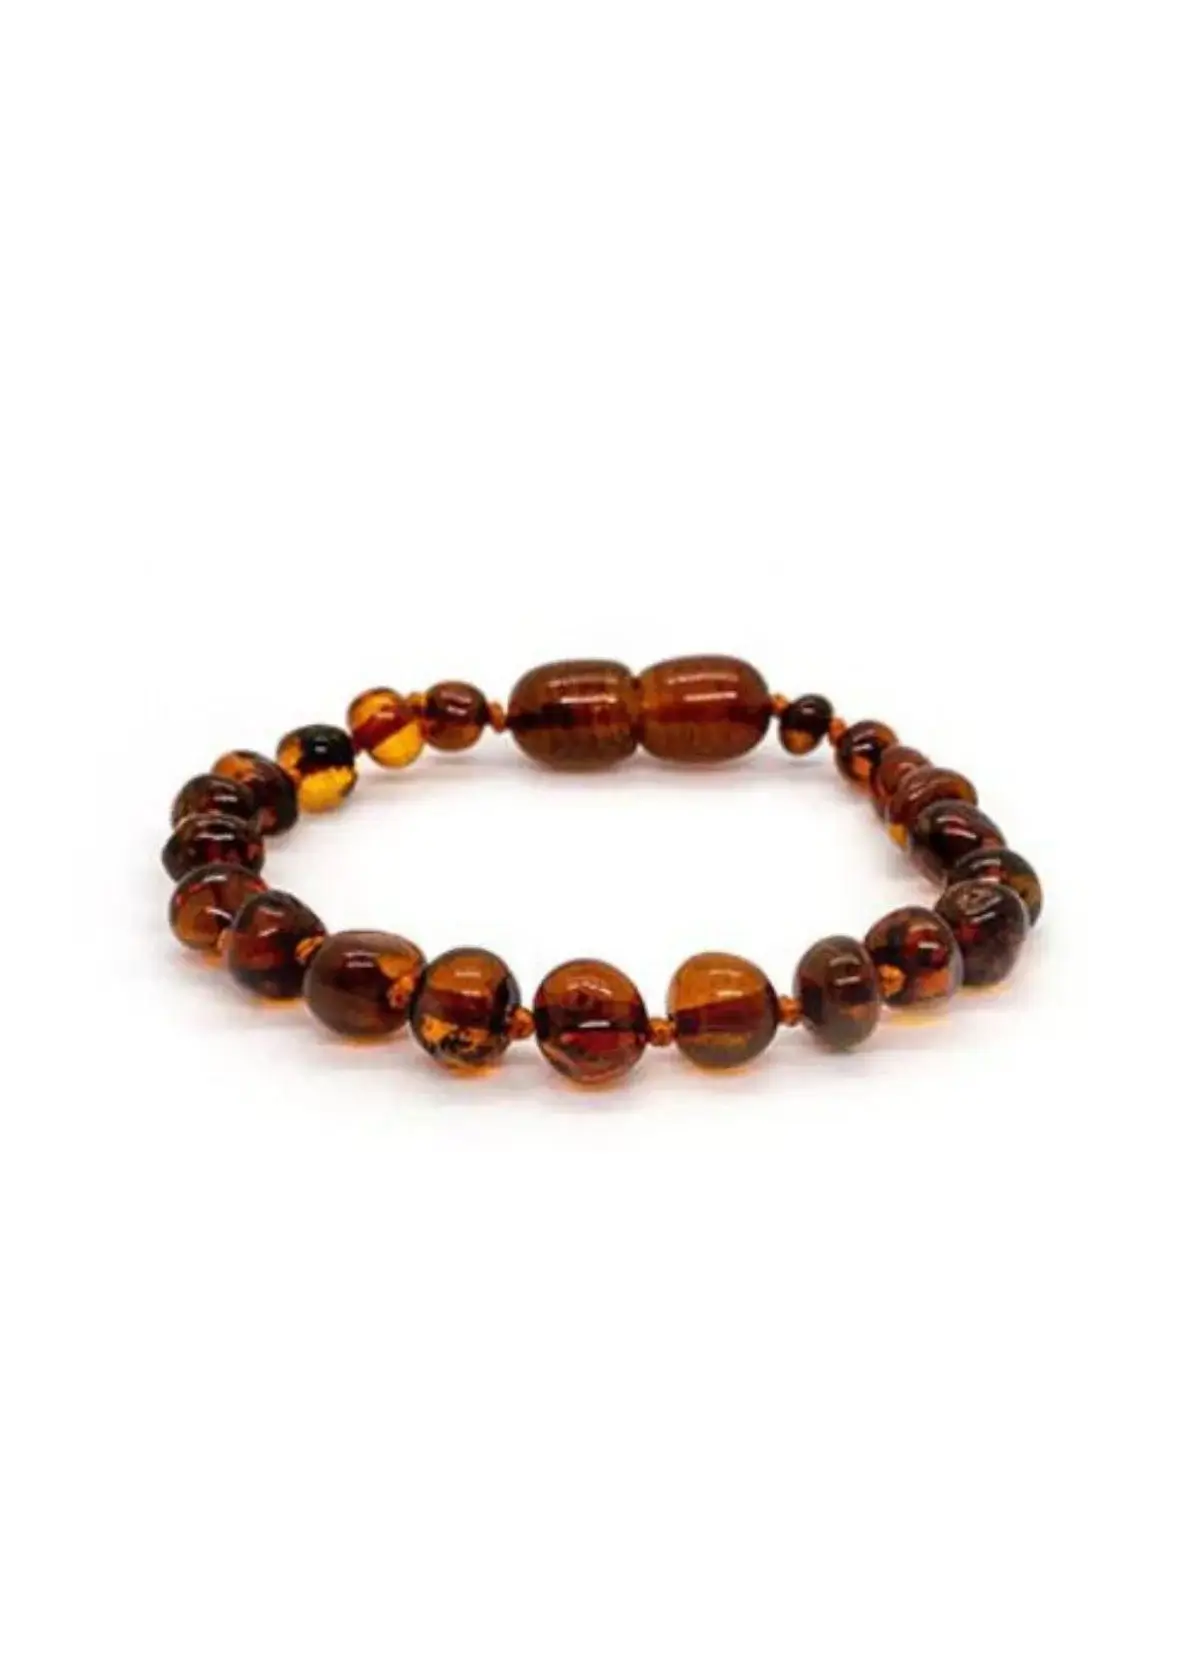 How to choose the right amber bracelets? 